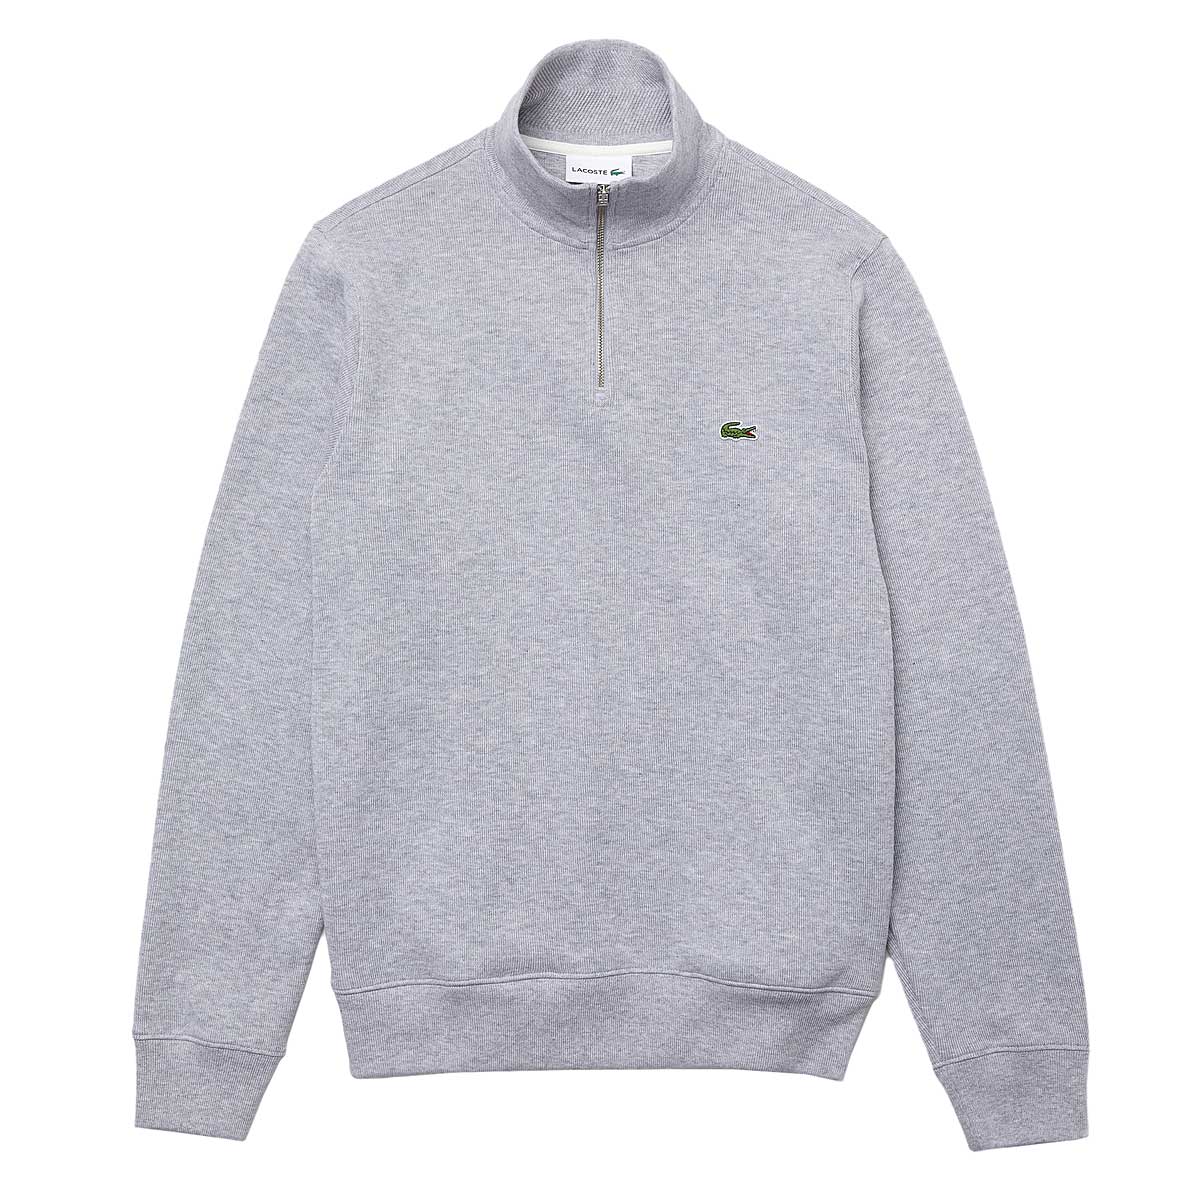 Image of Lacoste Half Zip Sweater, Silver Chine